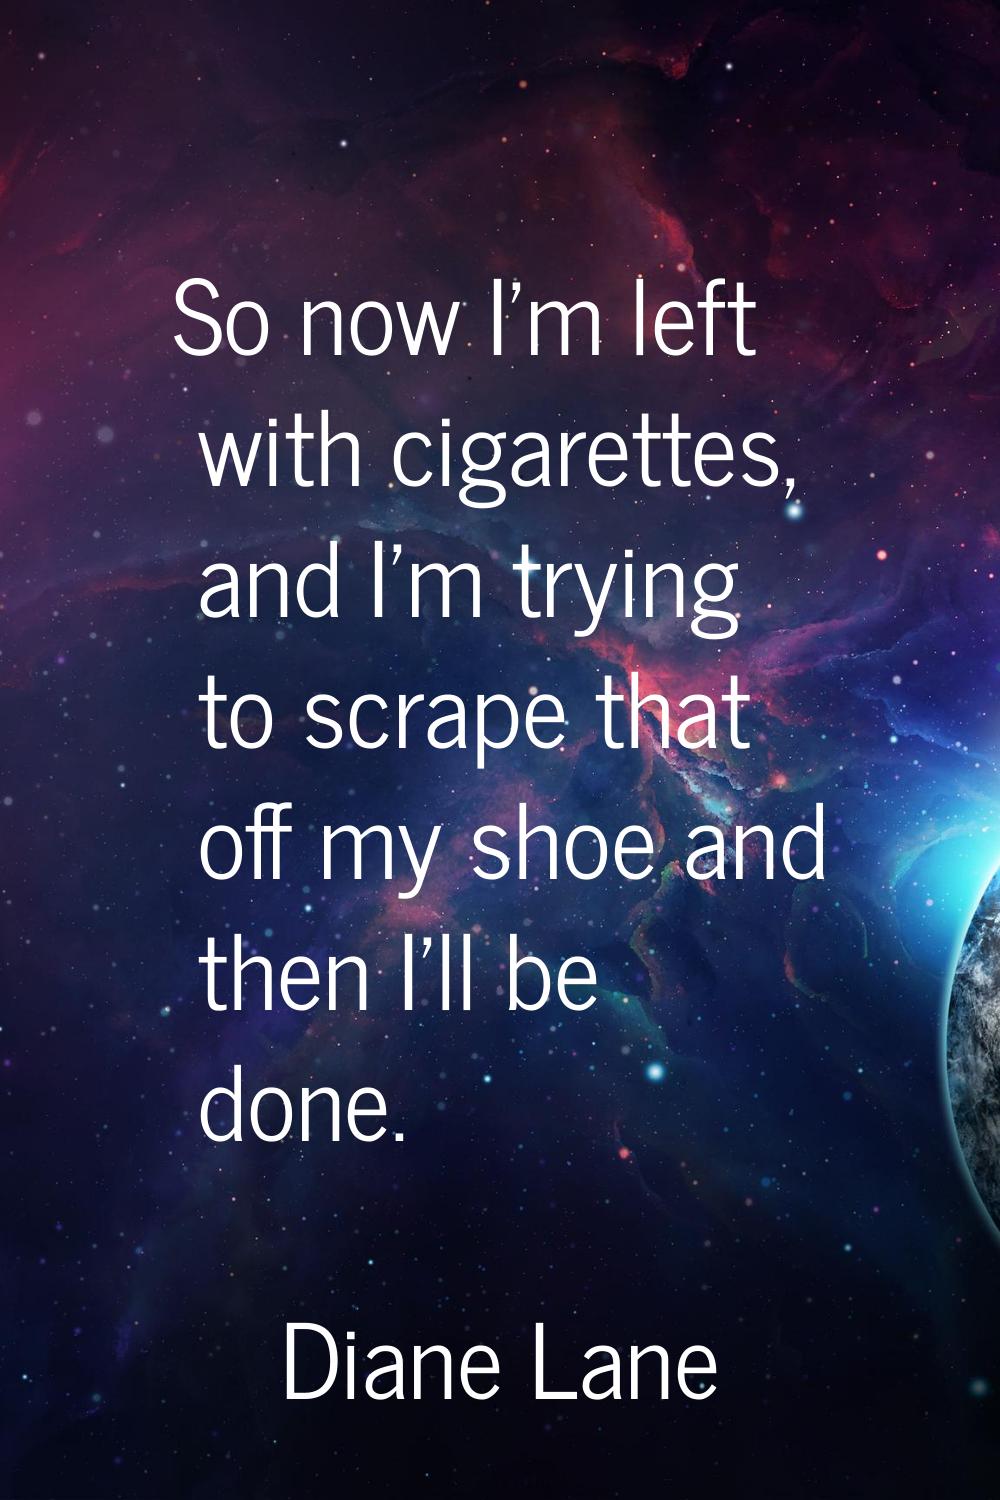 So now I'm left with cigarettes, and I'm trying to scrape that off my shoe and then I'll be done.